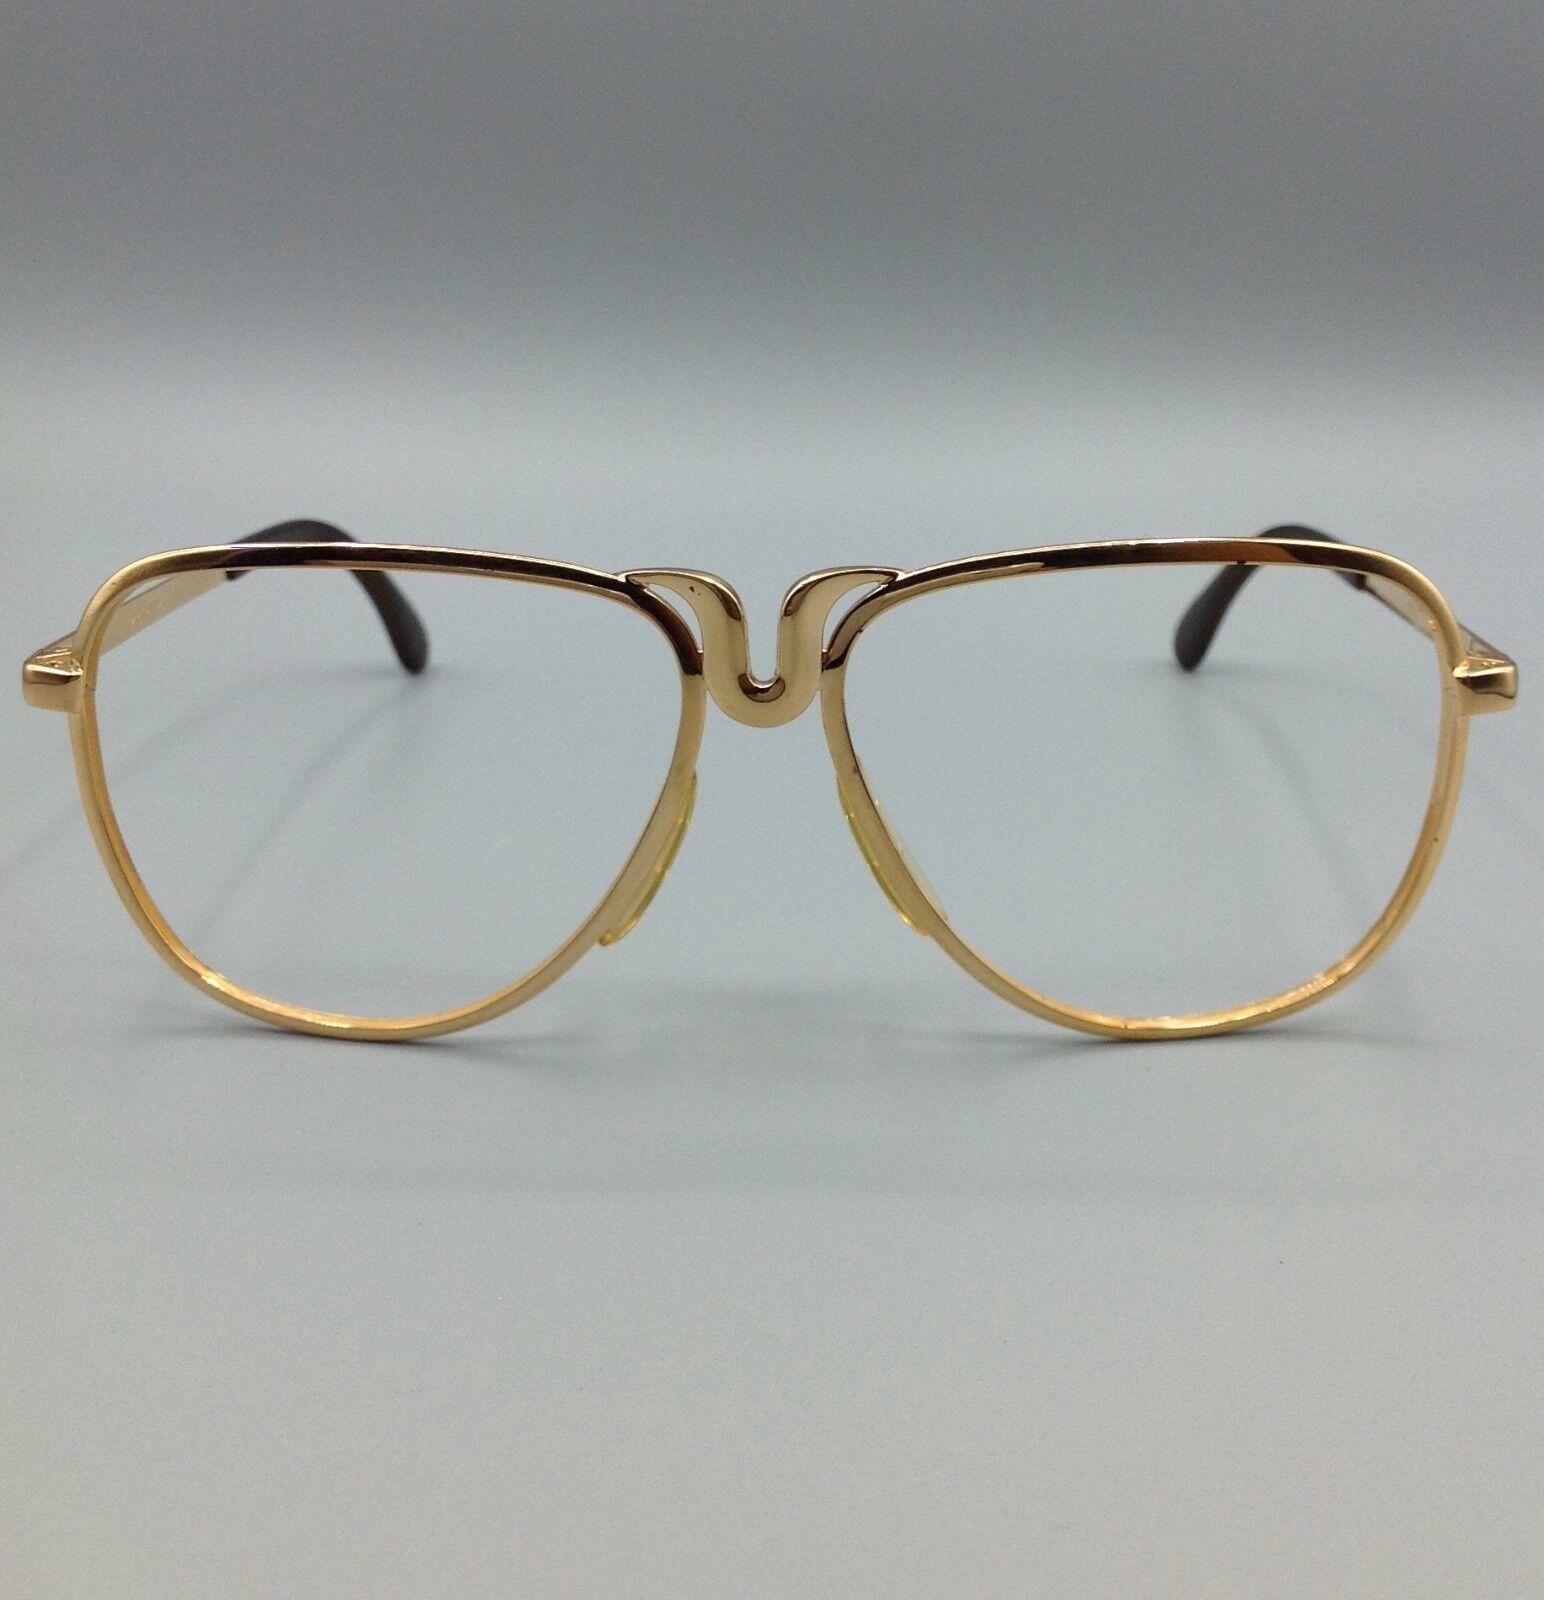 VINTAGE Marwitz 7806 BC2 cal.56 occhiali eyeglasses gold frame made in Germany